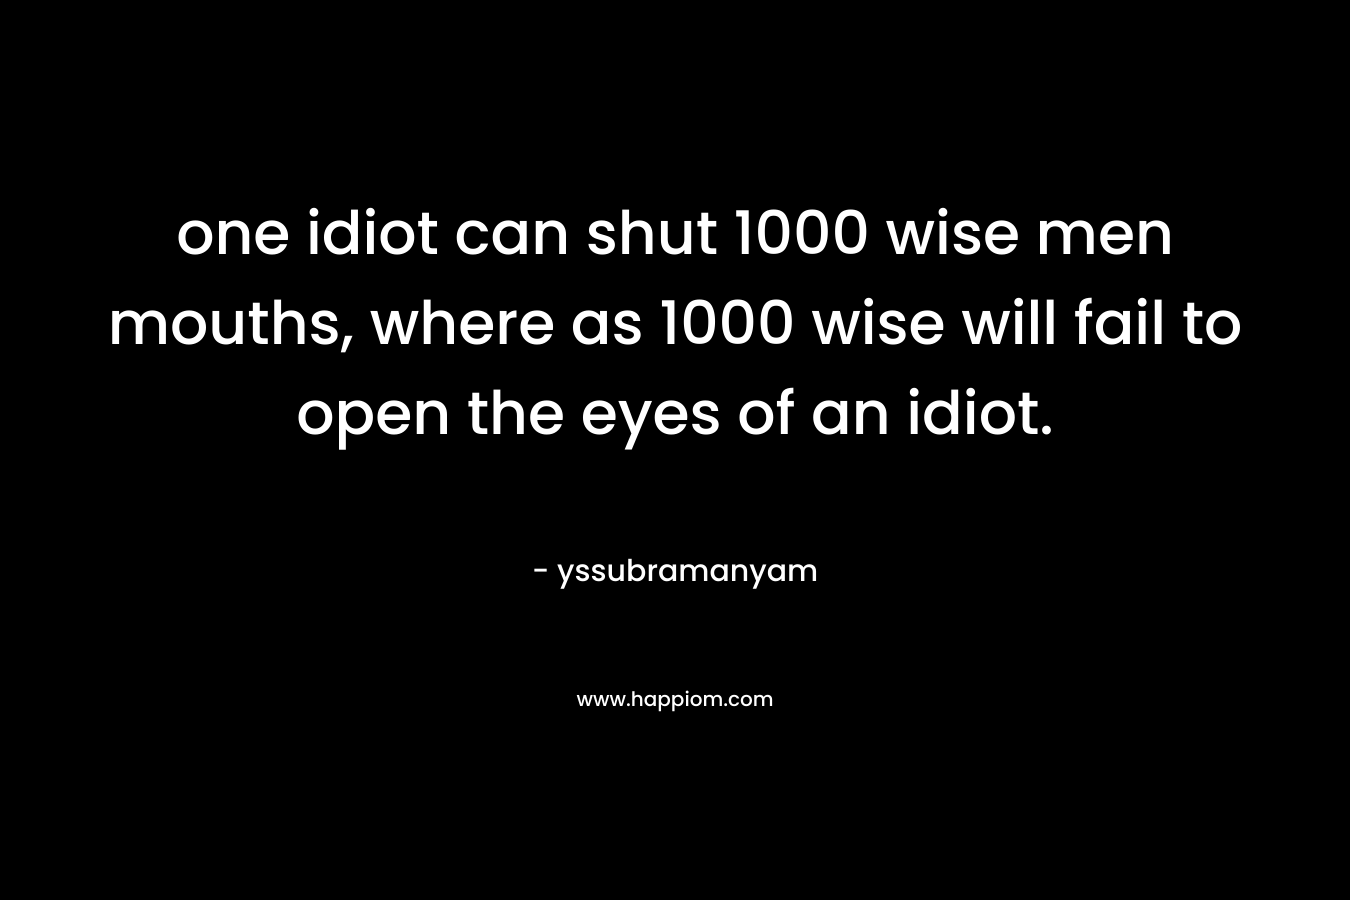 one idiot can shut 1000 wise men mouths, where as 1000 wise will fail to open the eyes of an idiot.